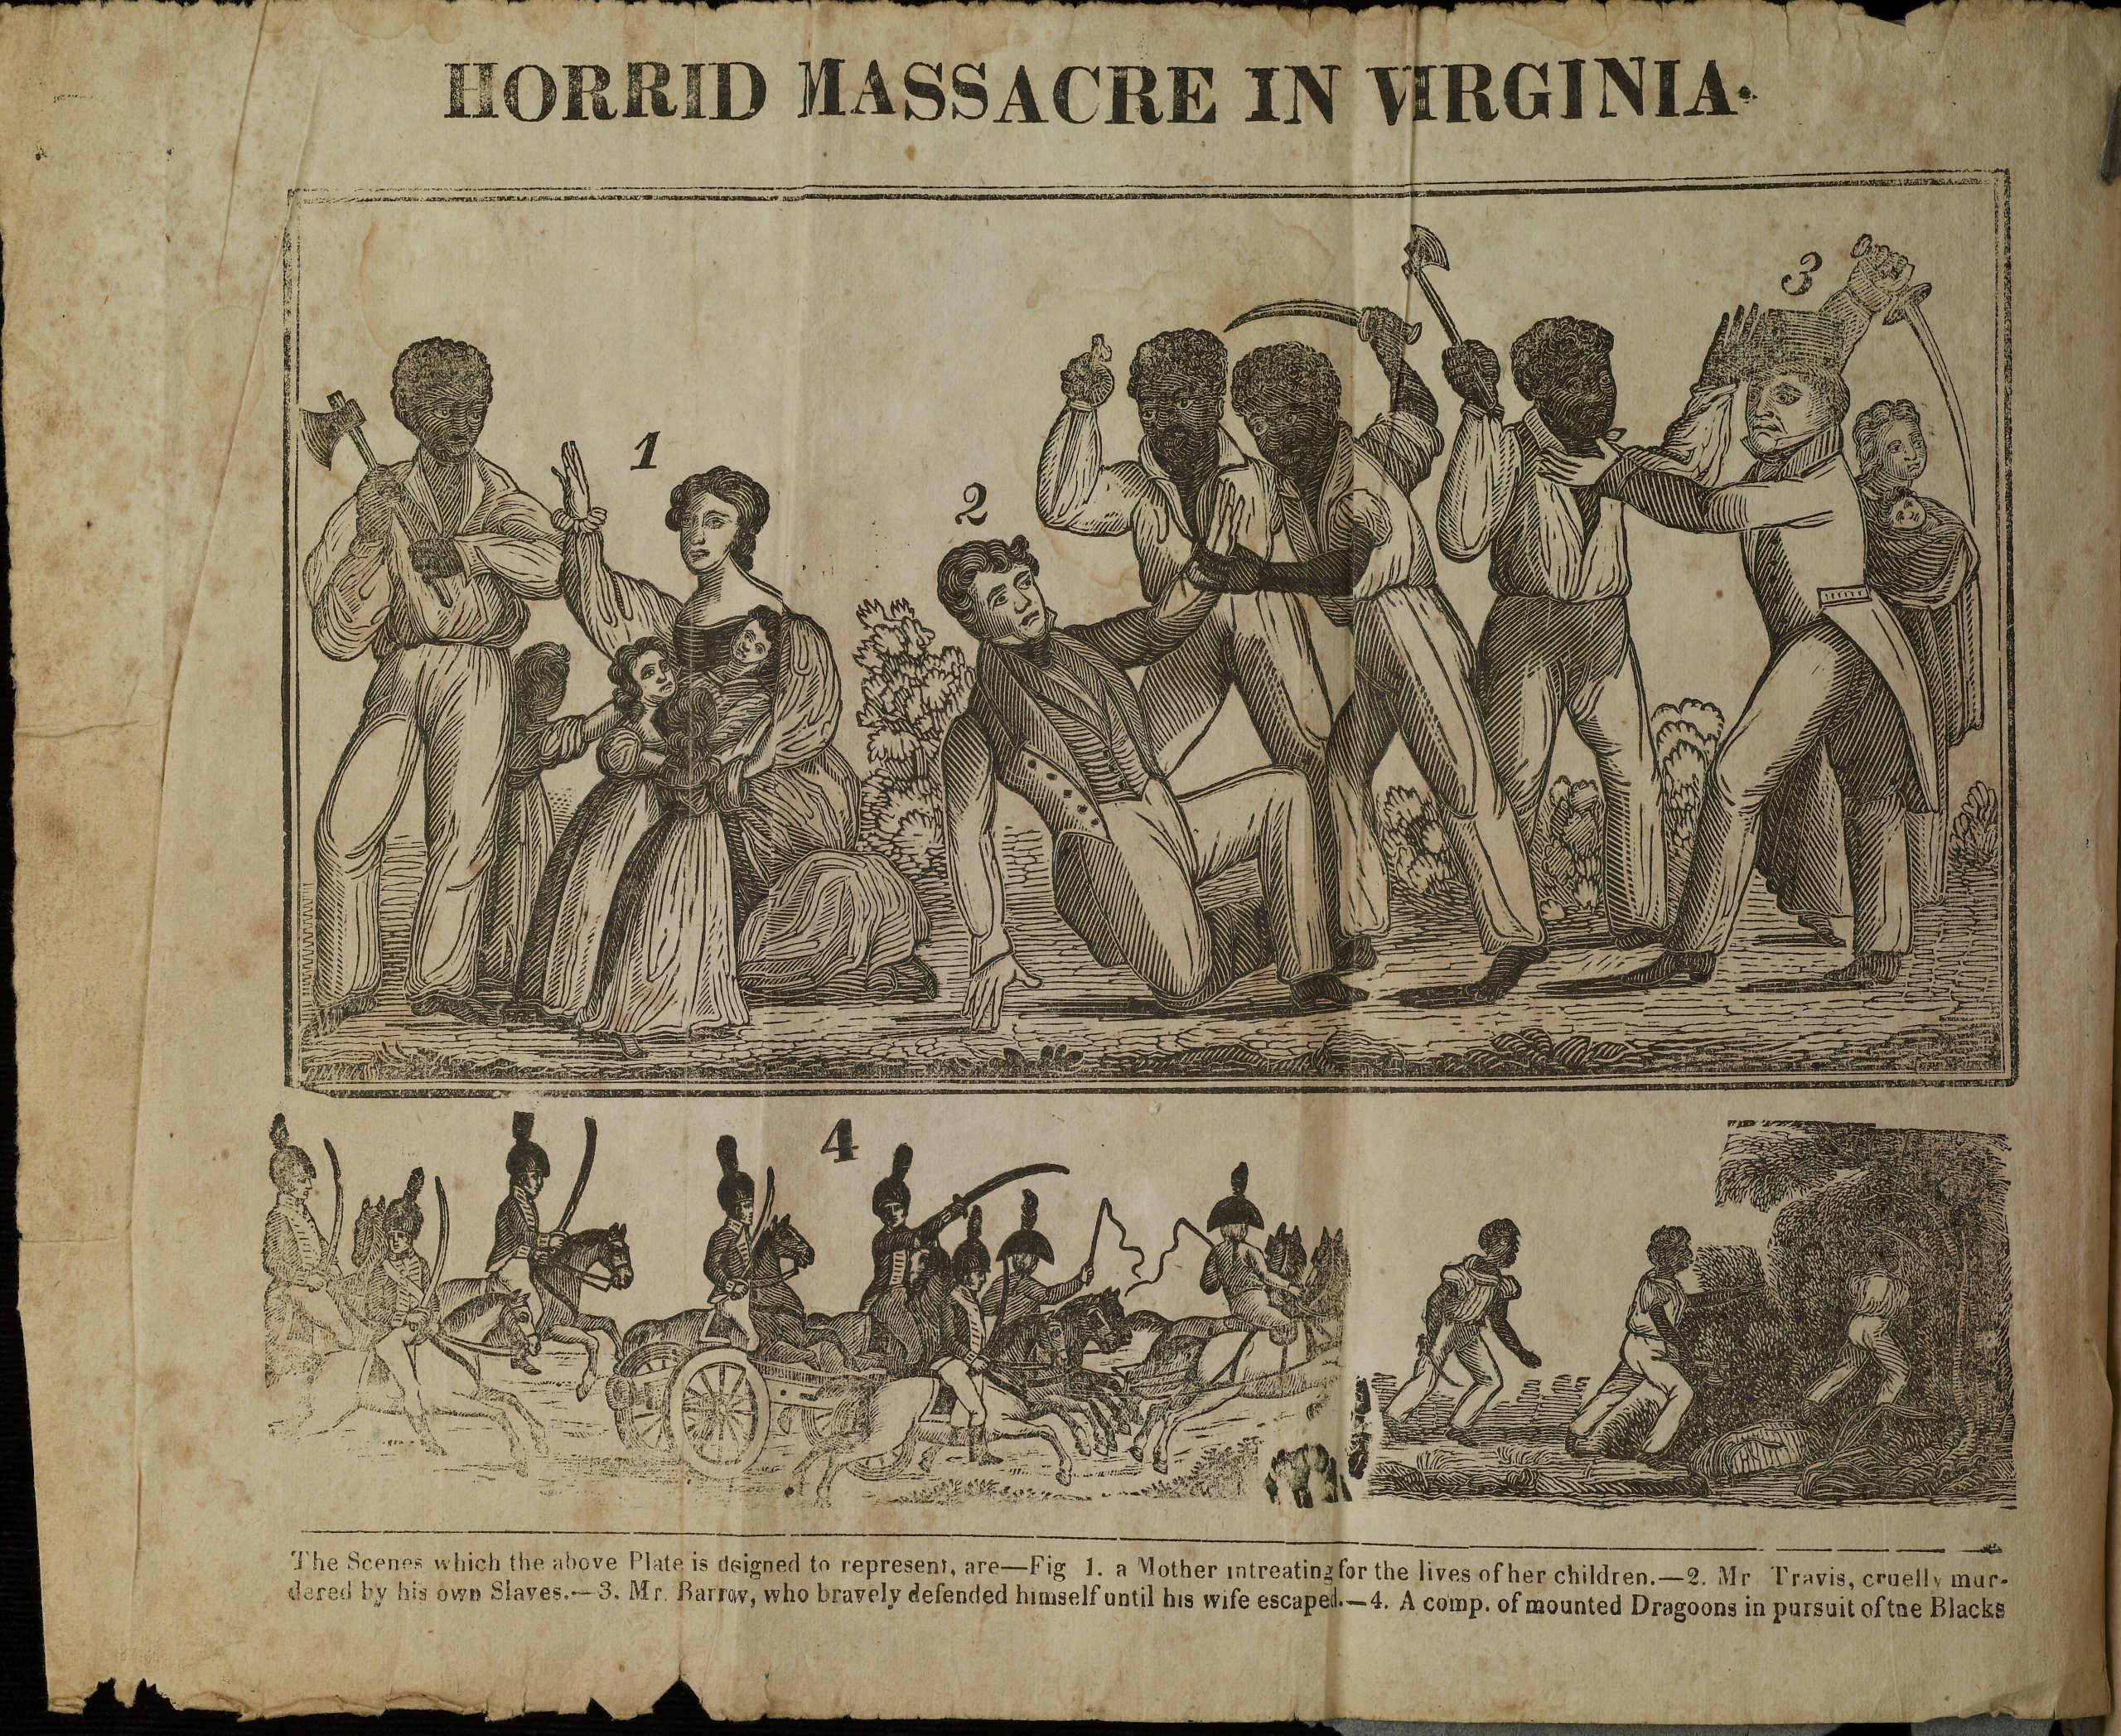 Woodcut depicting Nat Turner’s uprising, 1831 (University of Virginia Special Collections)